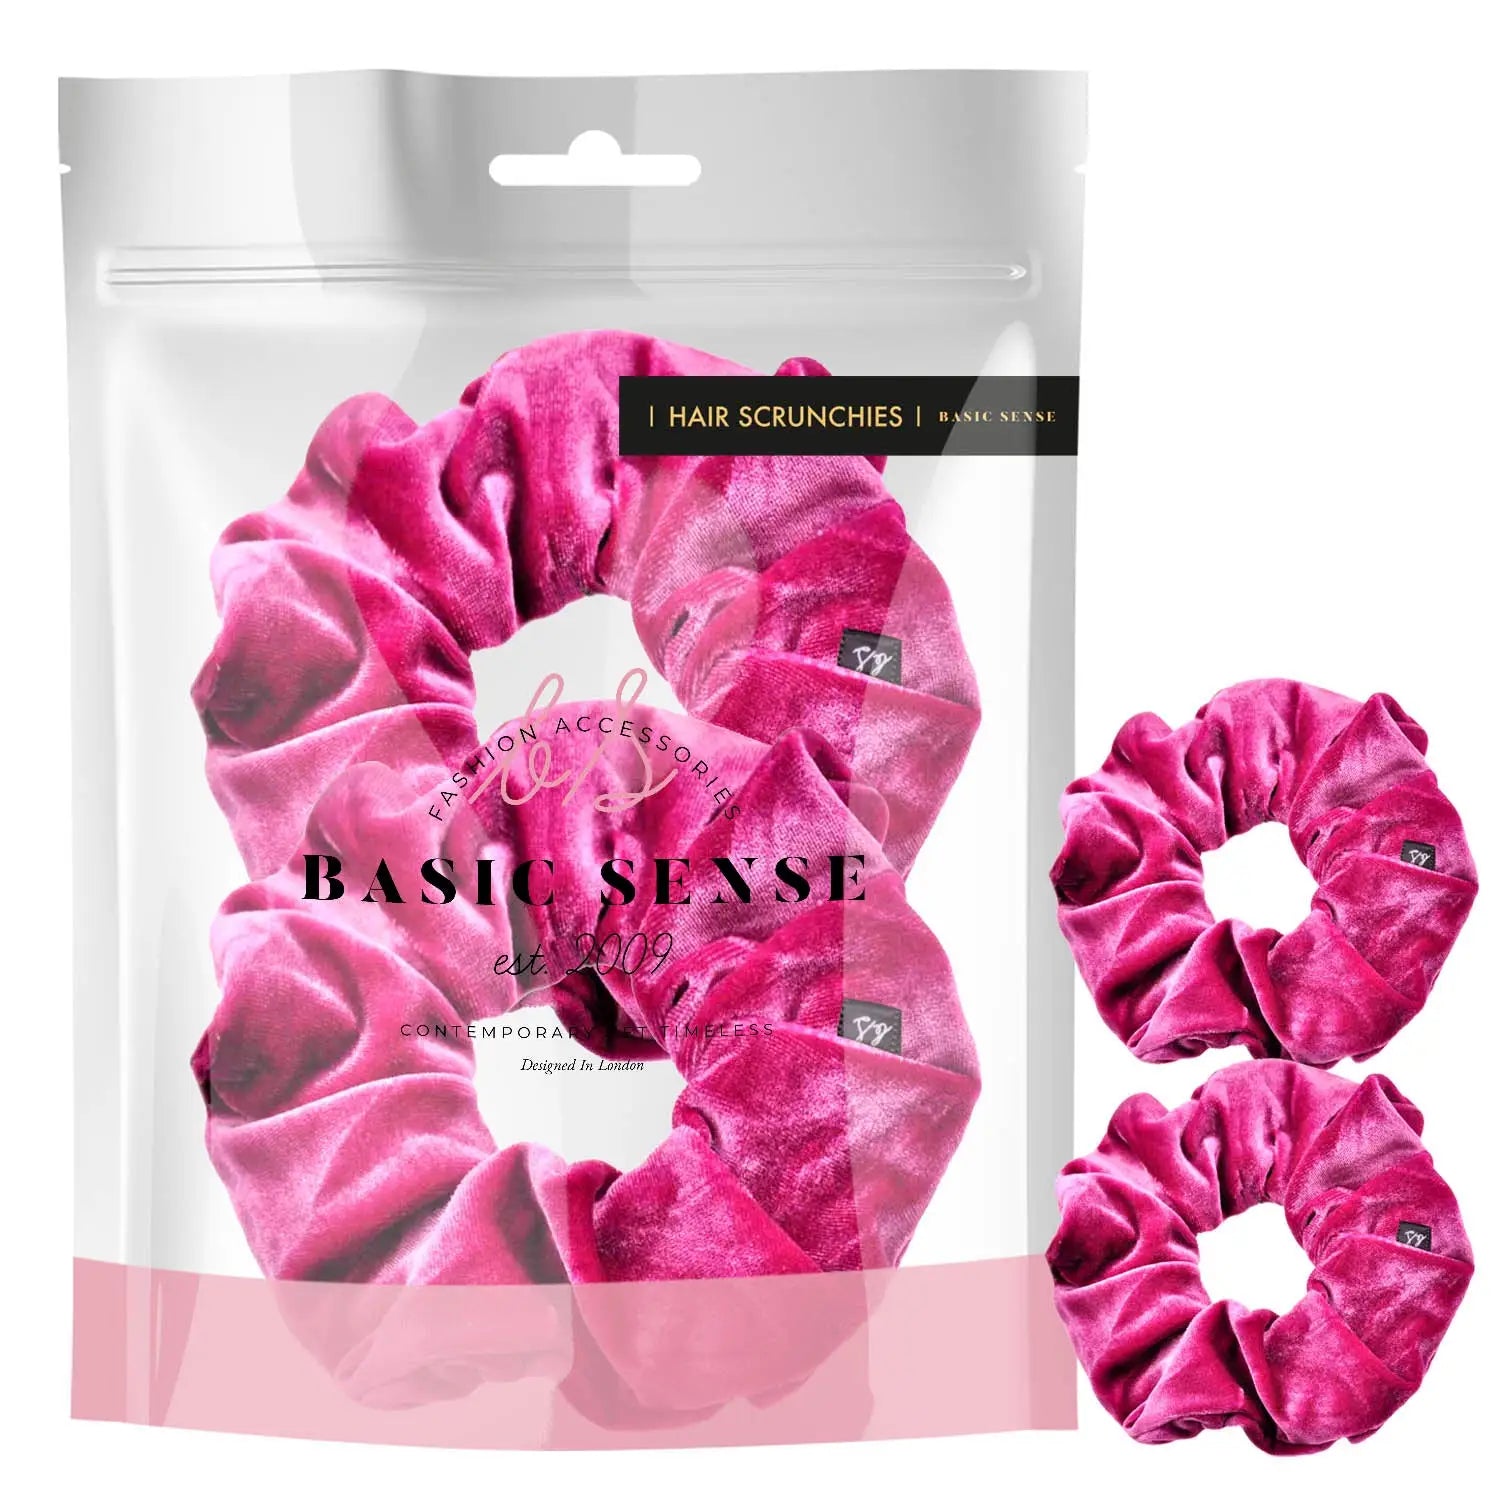 Pink velvet large scrunchies hair tie crafted with premium fabric.